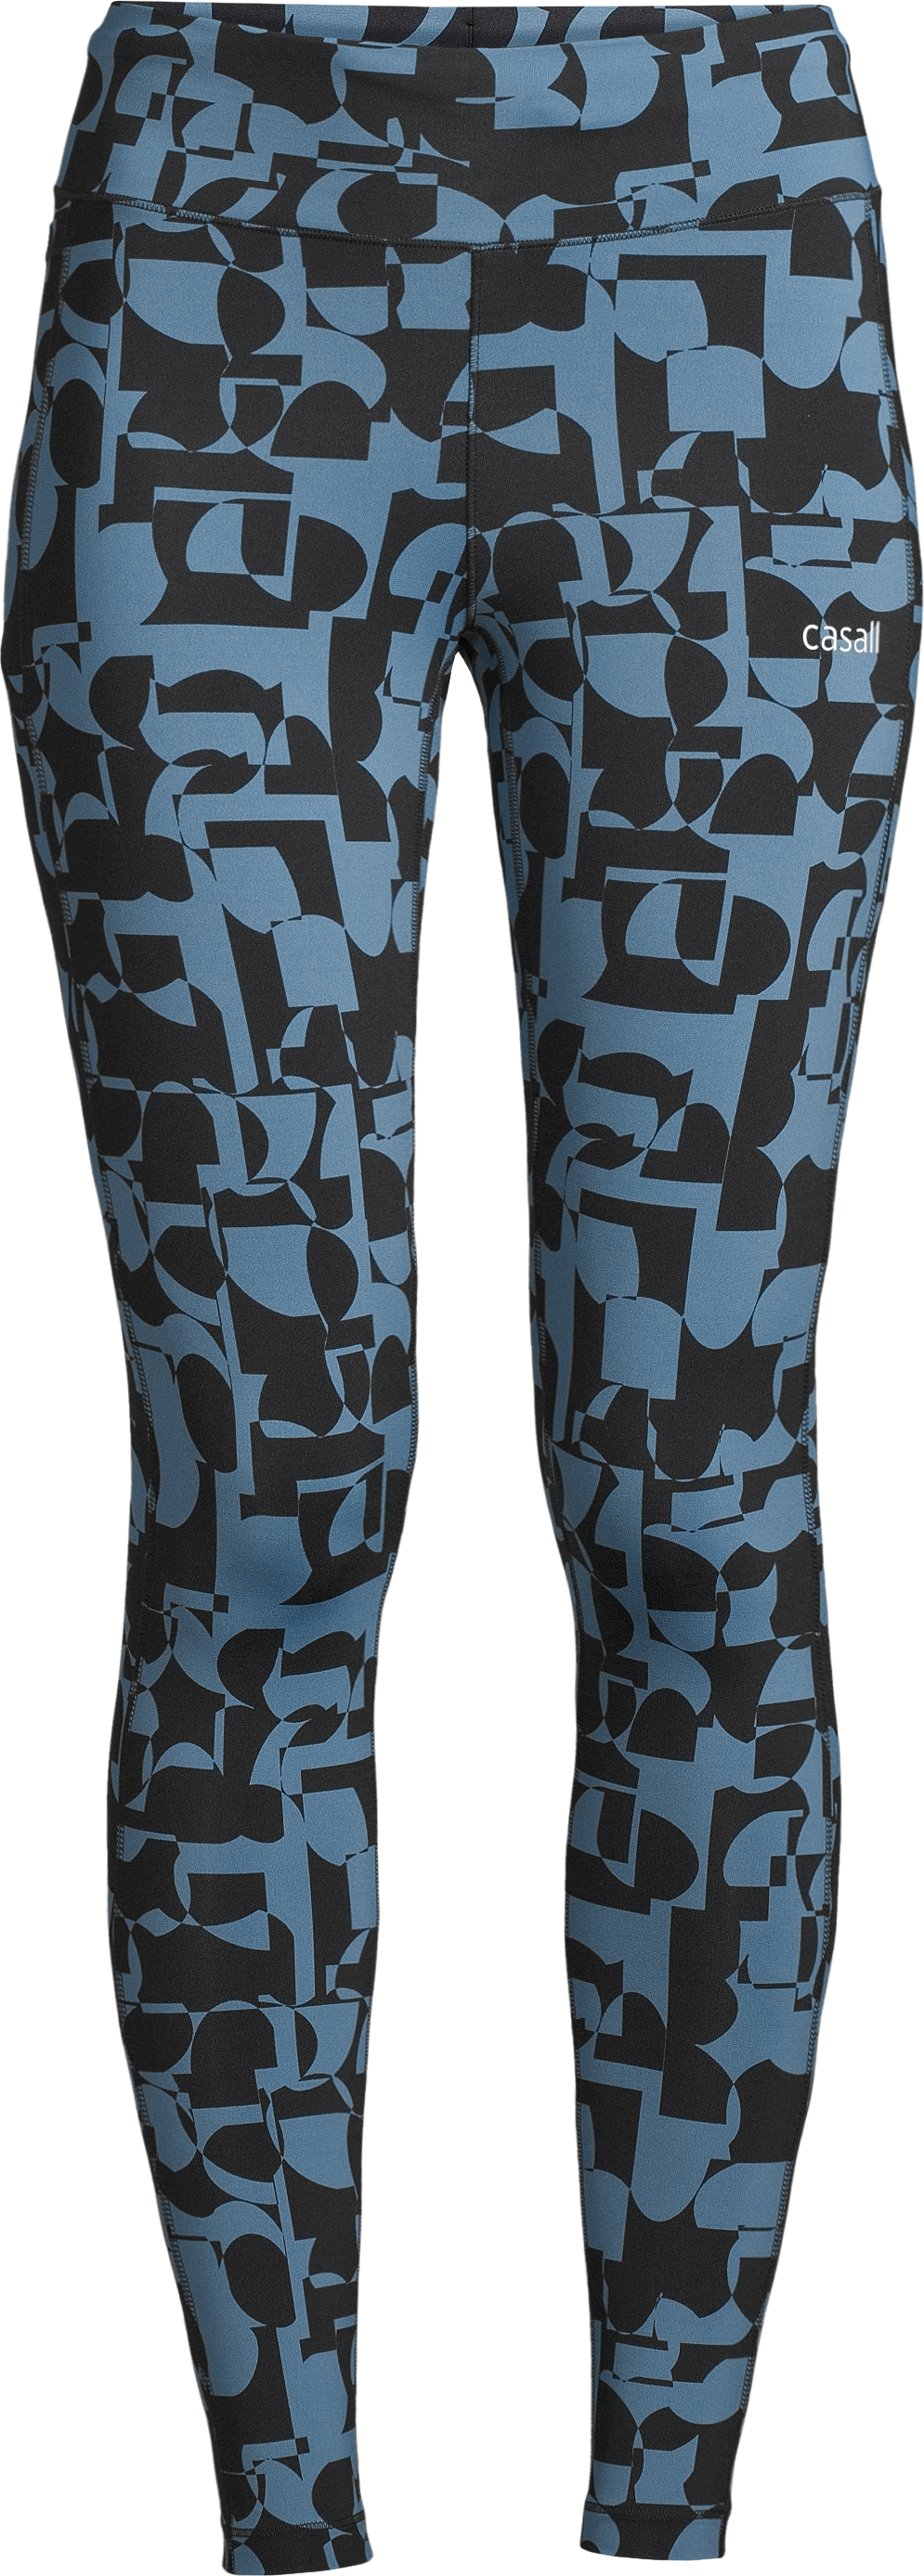 Casall Women’s Iconic Printed 7/8 Tights Echo Blue